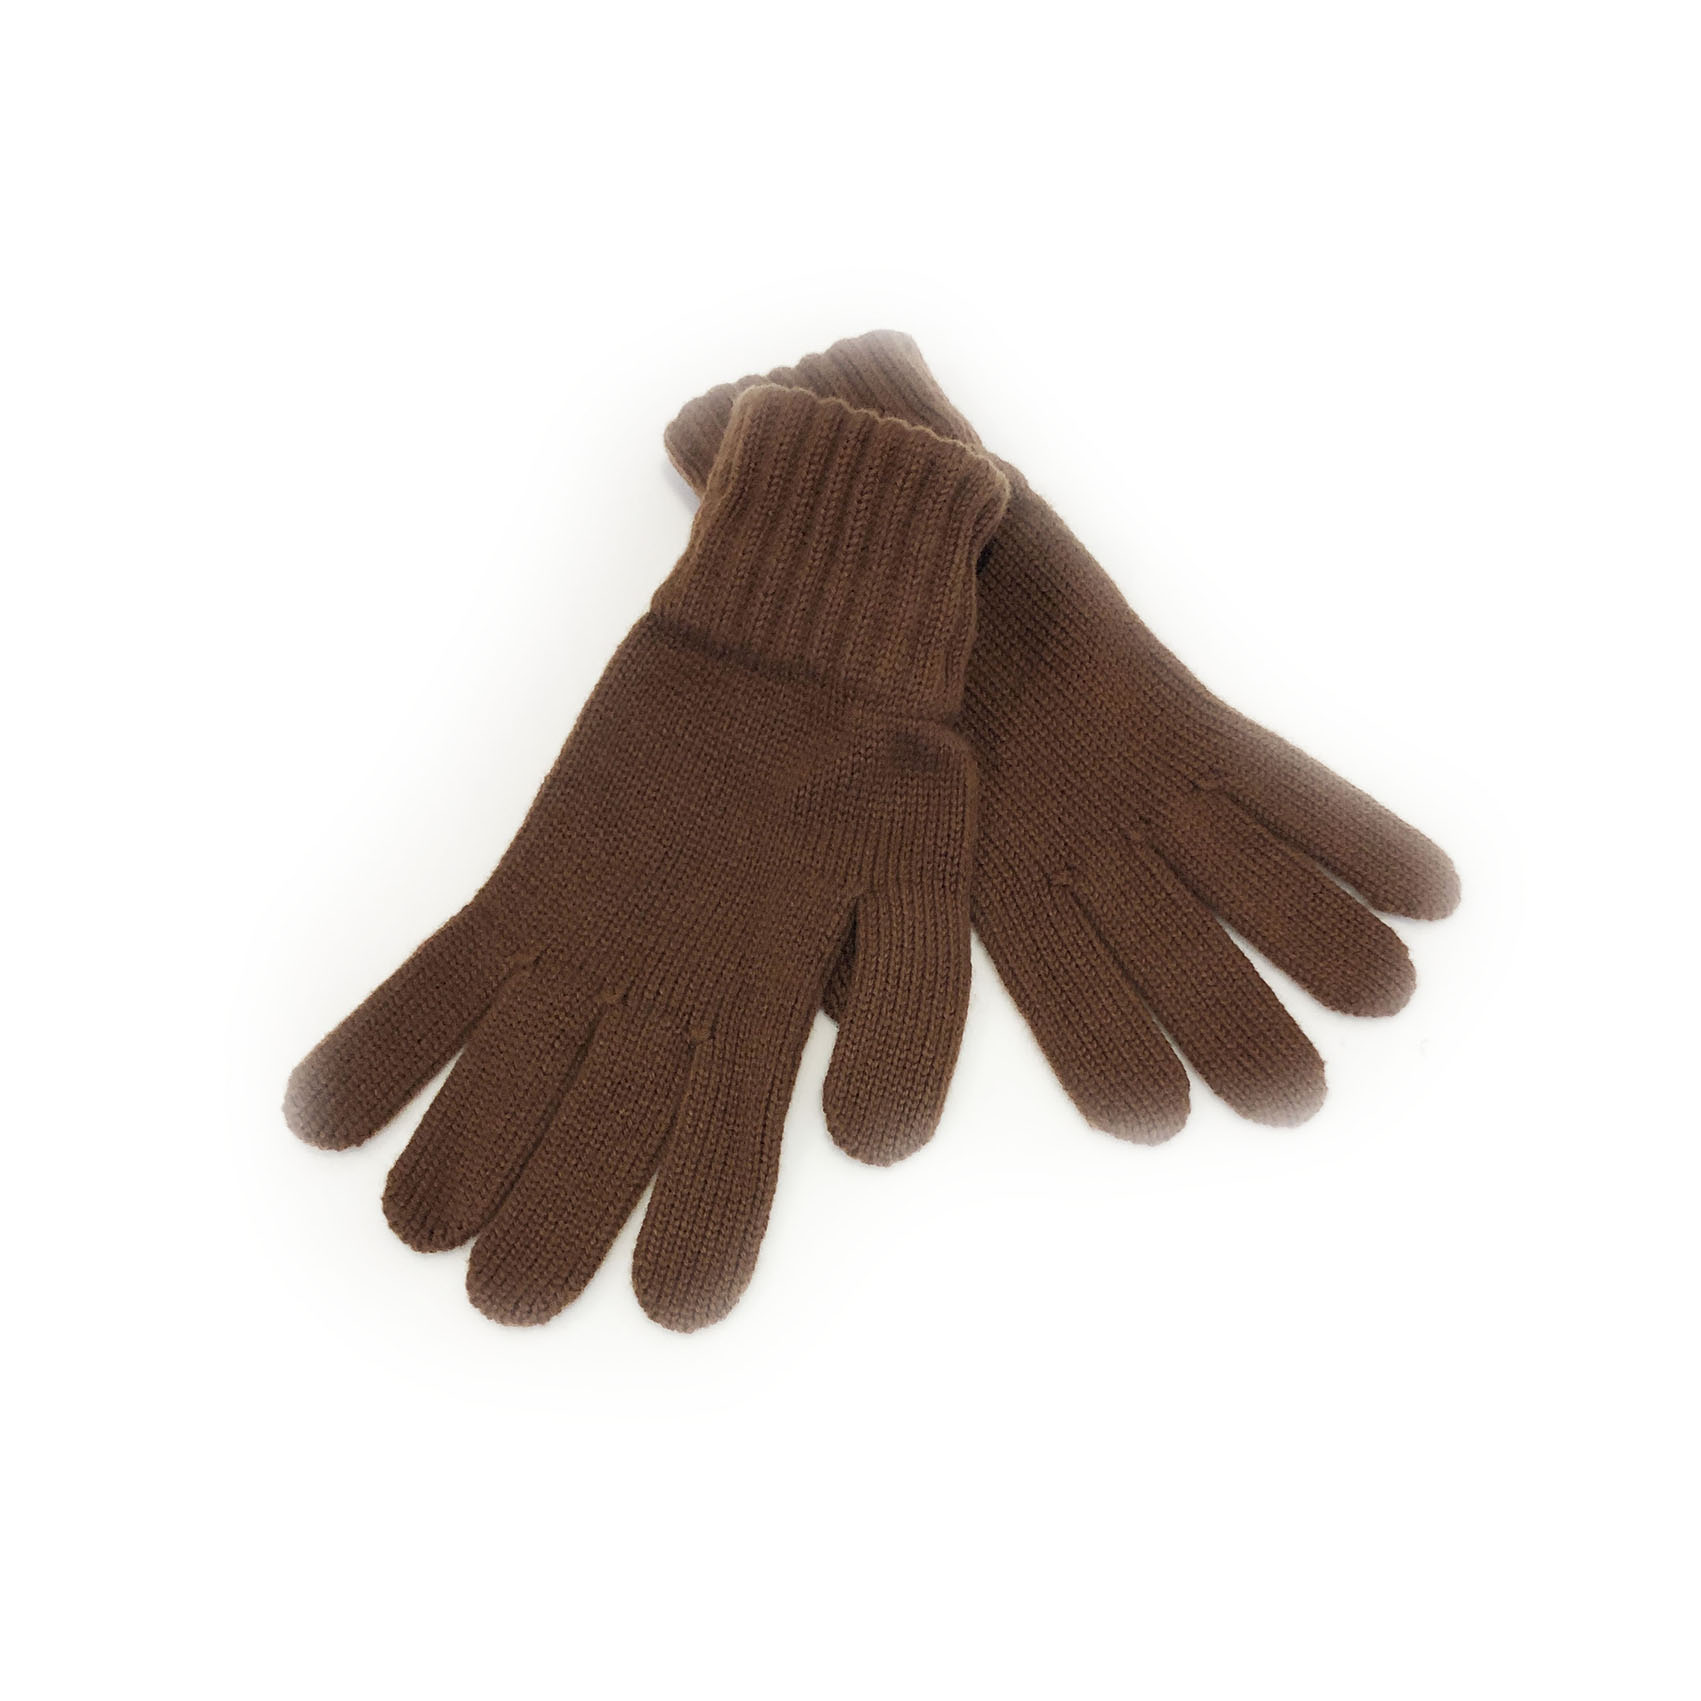 An image of Ladies 100% Cashmere Gloves - Conker Brown